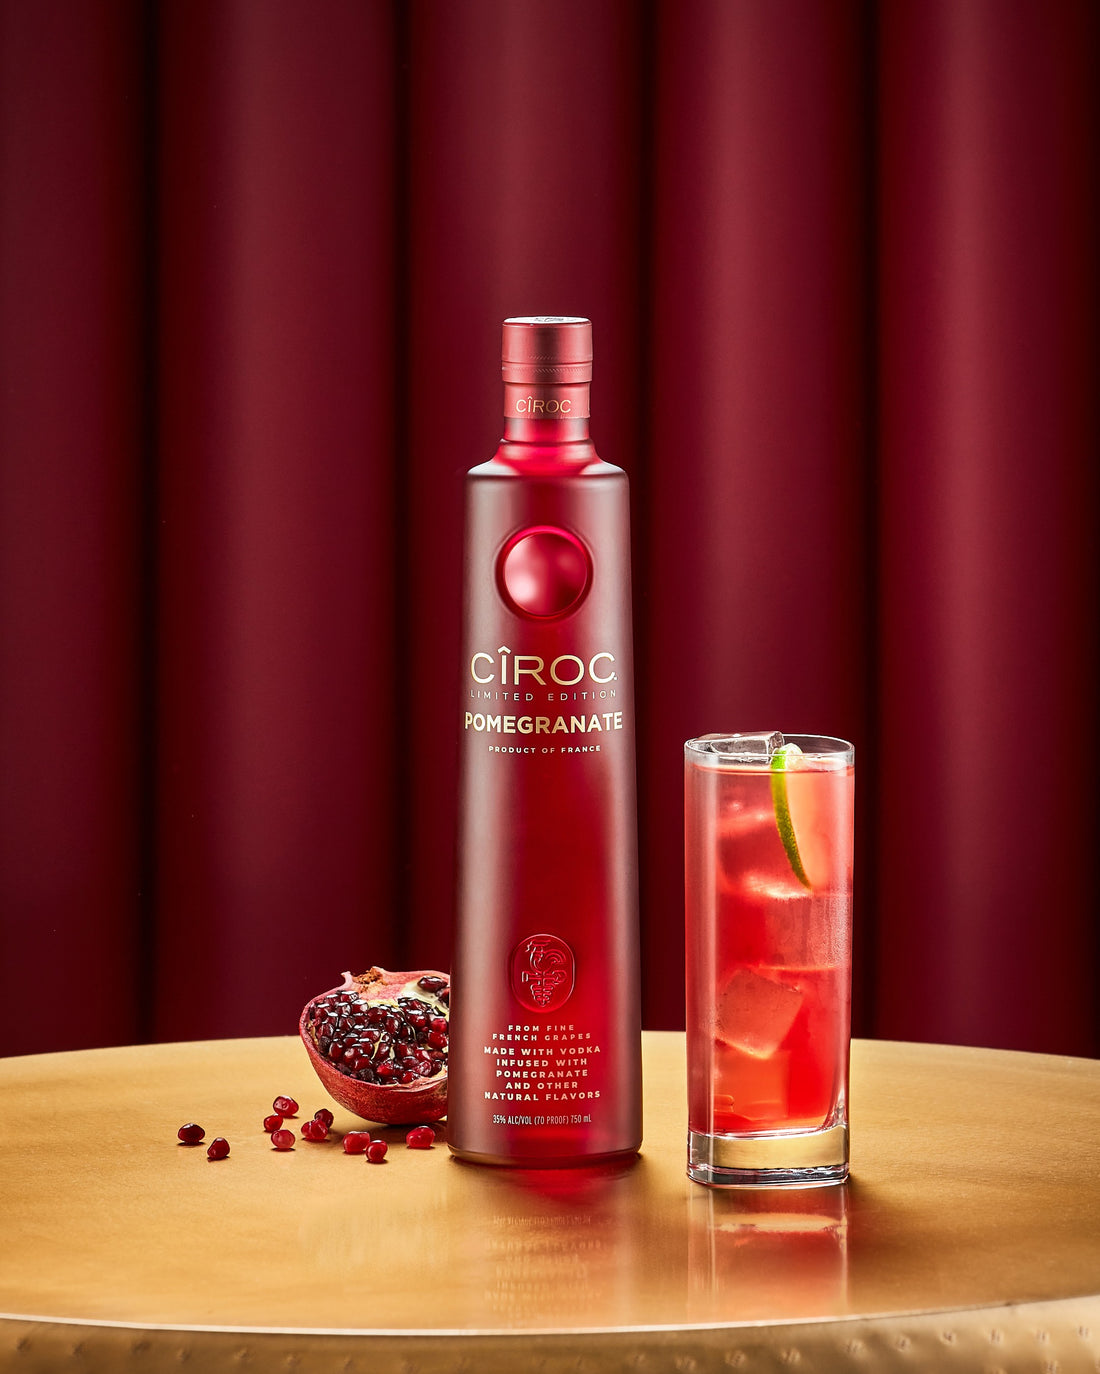 CÎROC And Sean “Diddy” Combs Introduce New Limited-Edition CÎROC Pomegranate